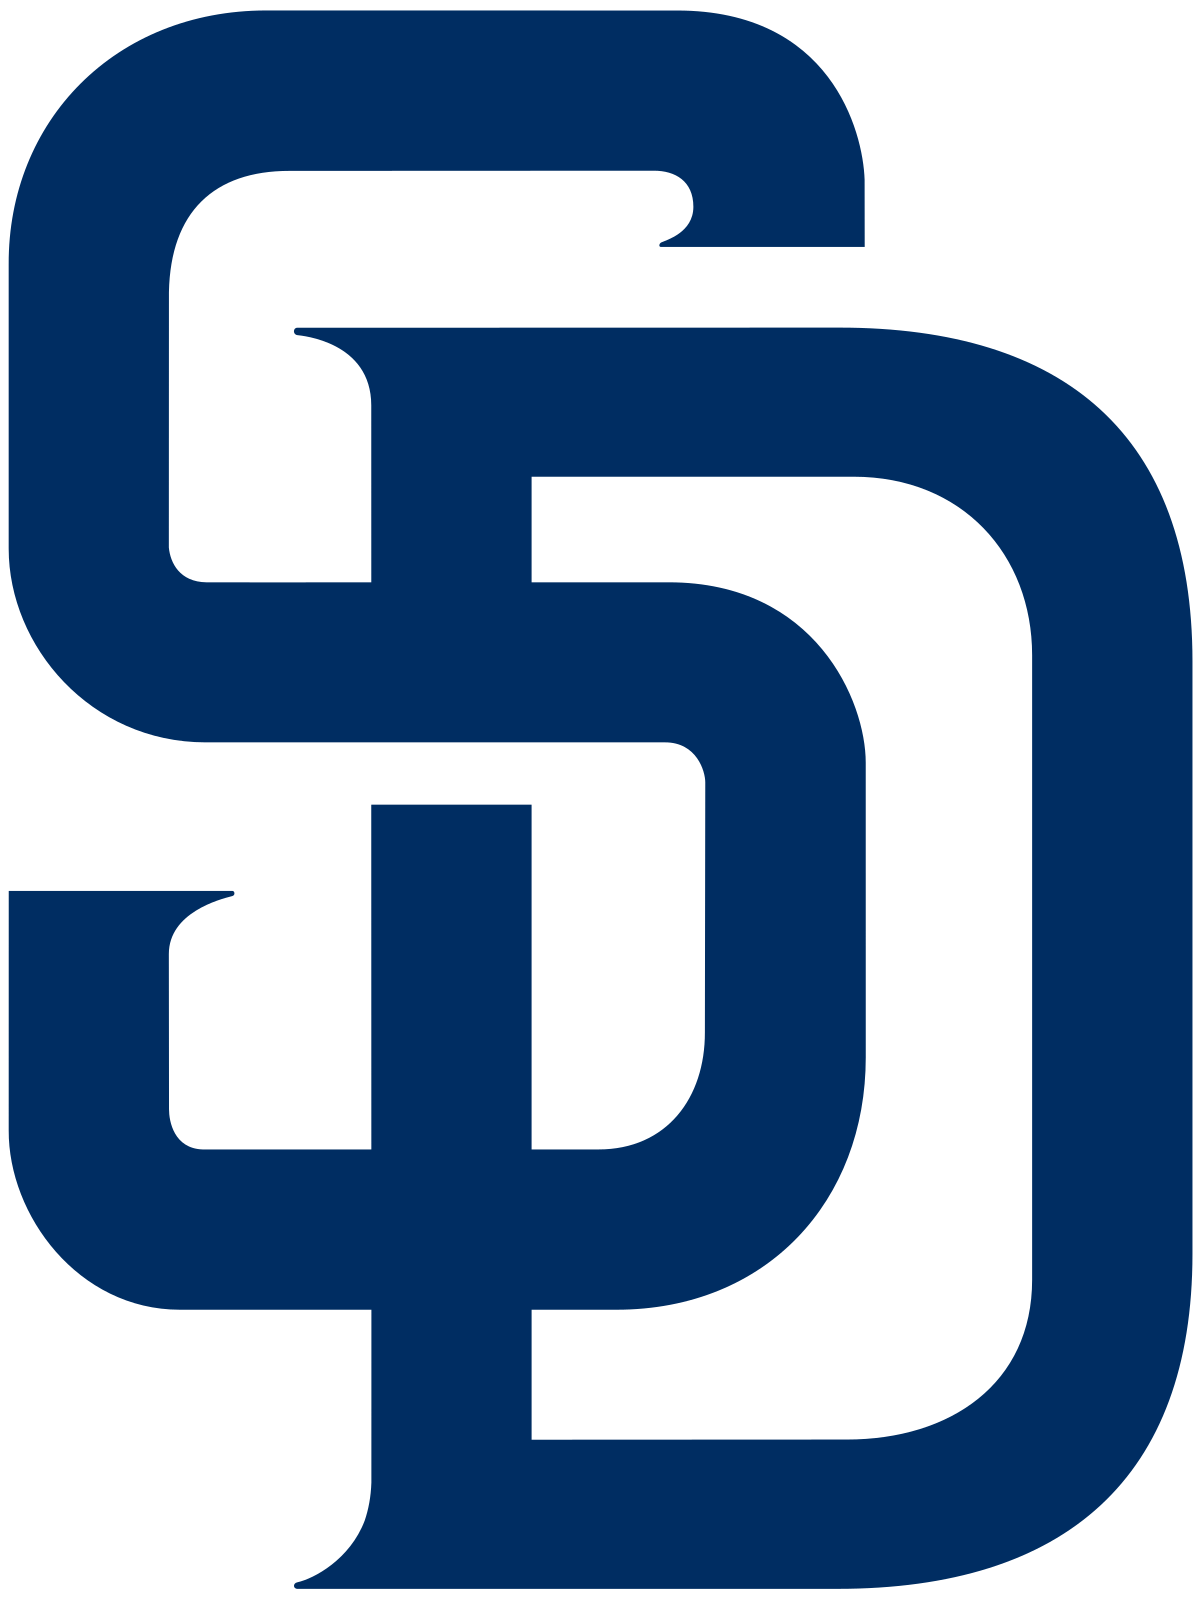 Name and 3 Blue People Icon Logo - San Diego Padres